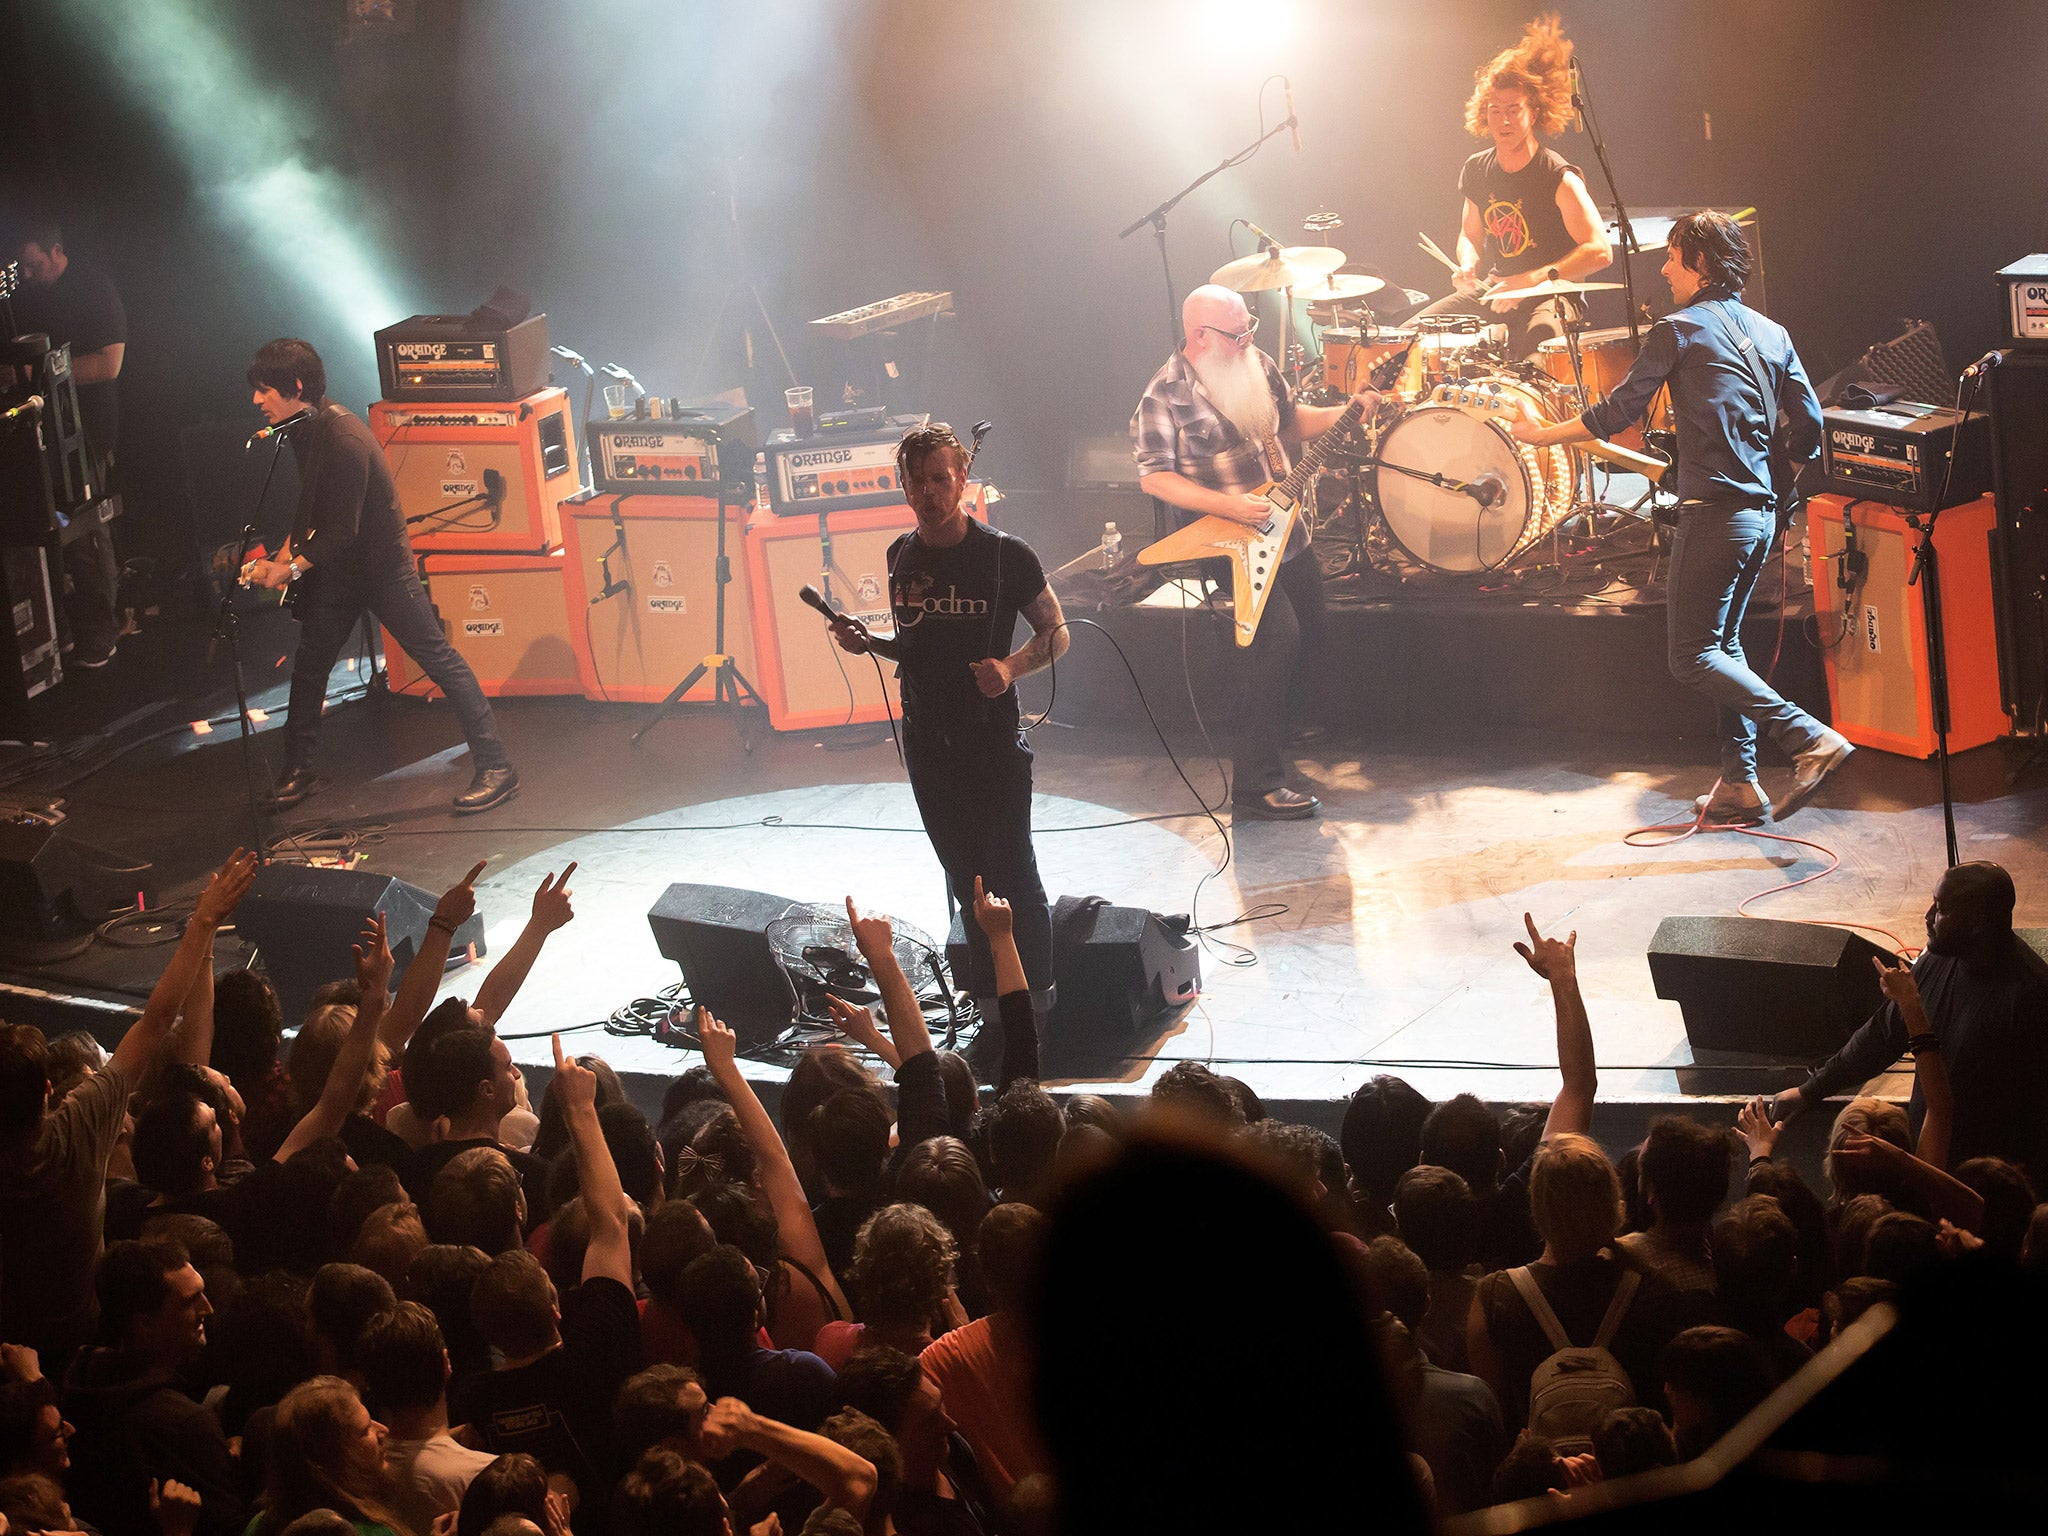 Eagles of Death Metal performing at the Bataclan, moments before the attack